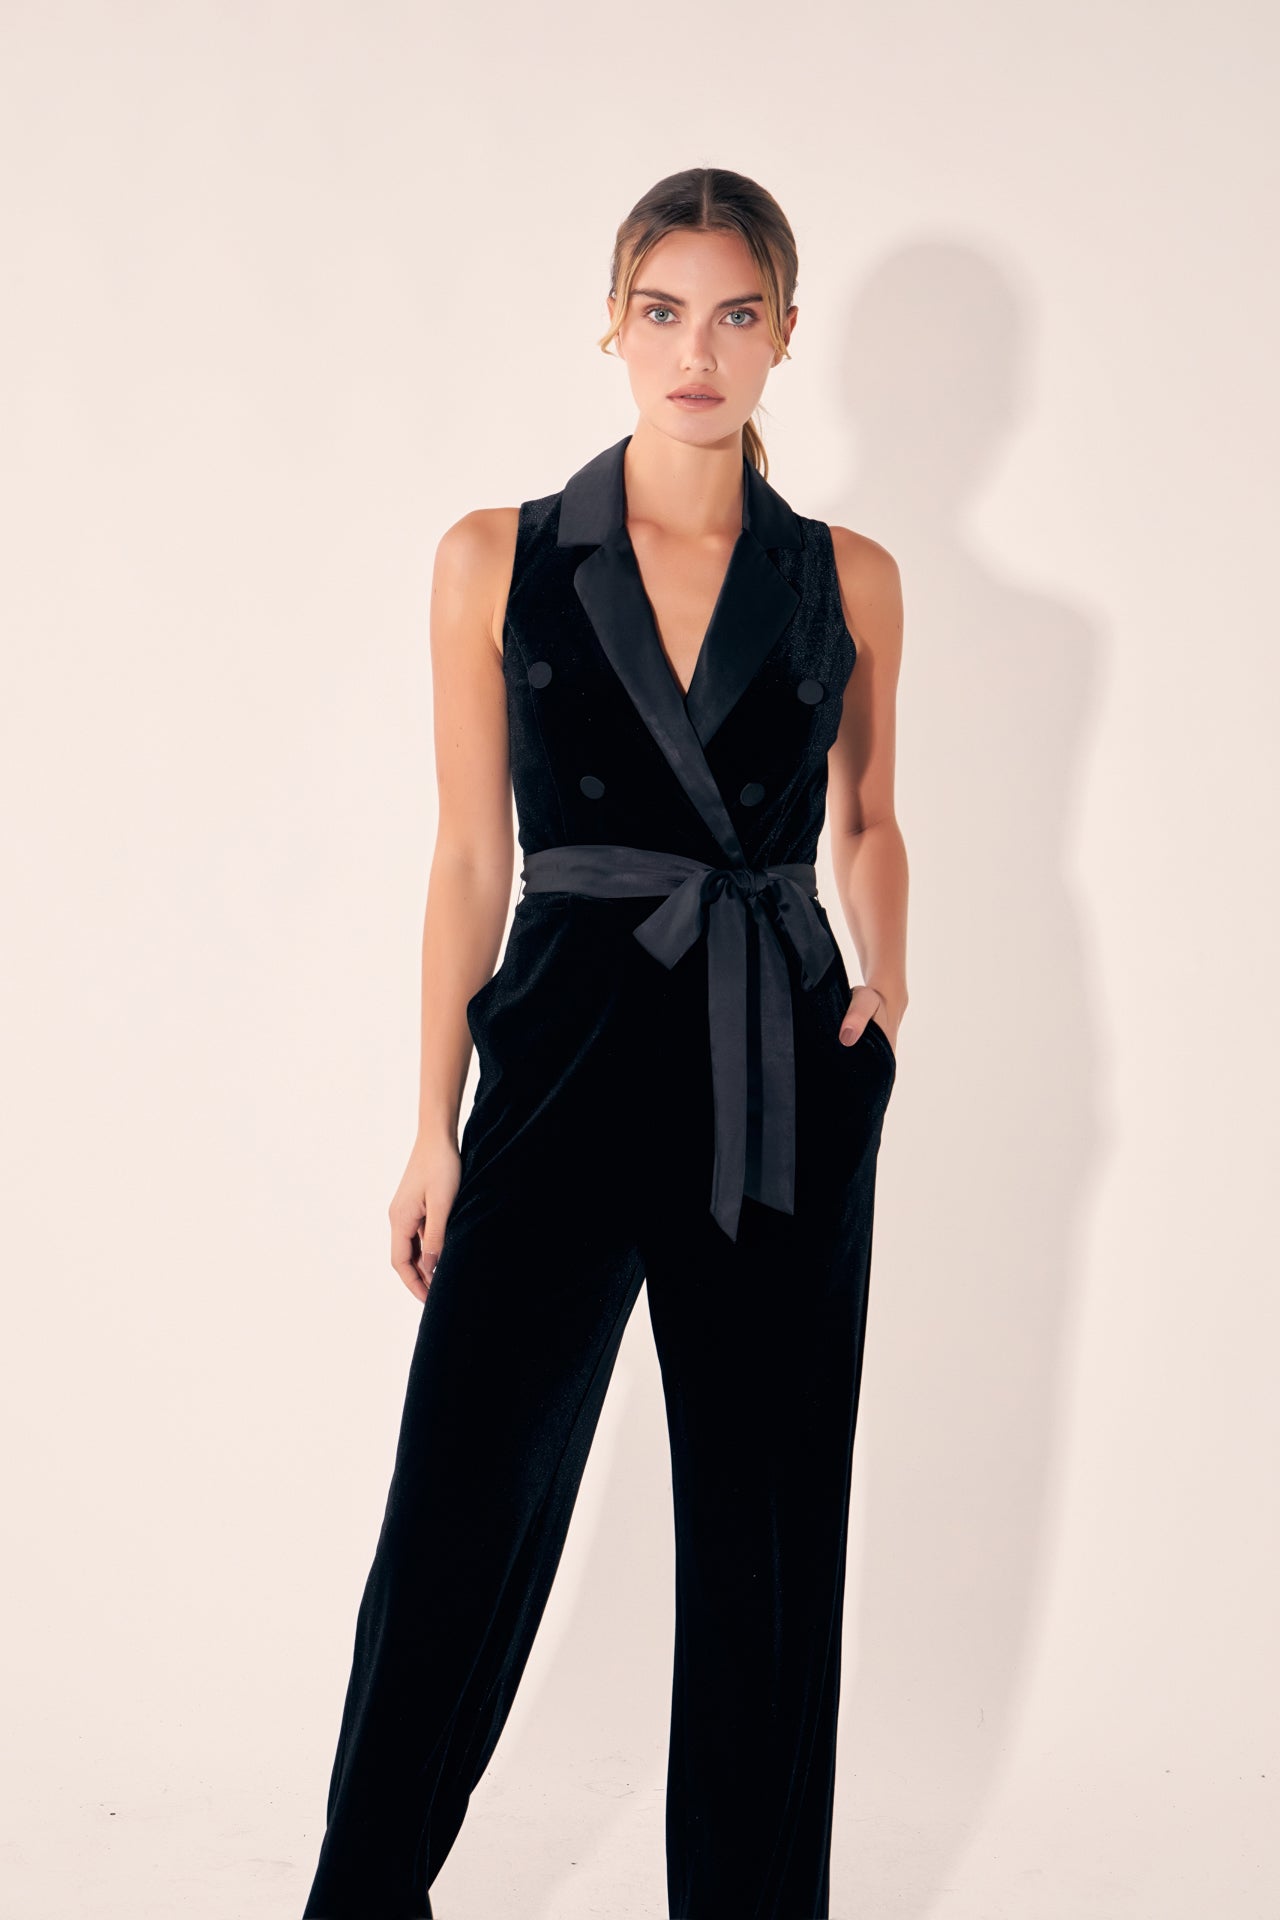 Velvet Pantsuit: Stepping into Confidence with the Ultimate